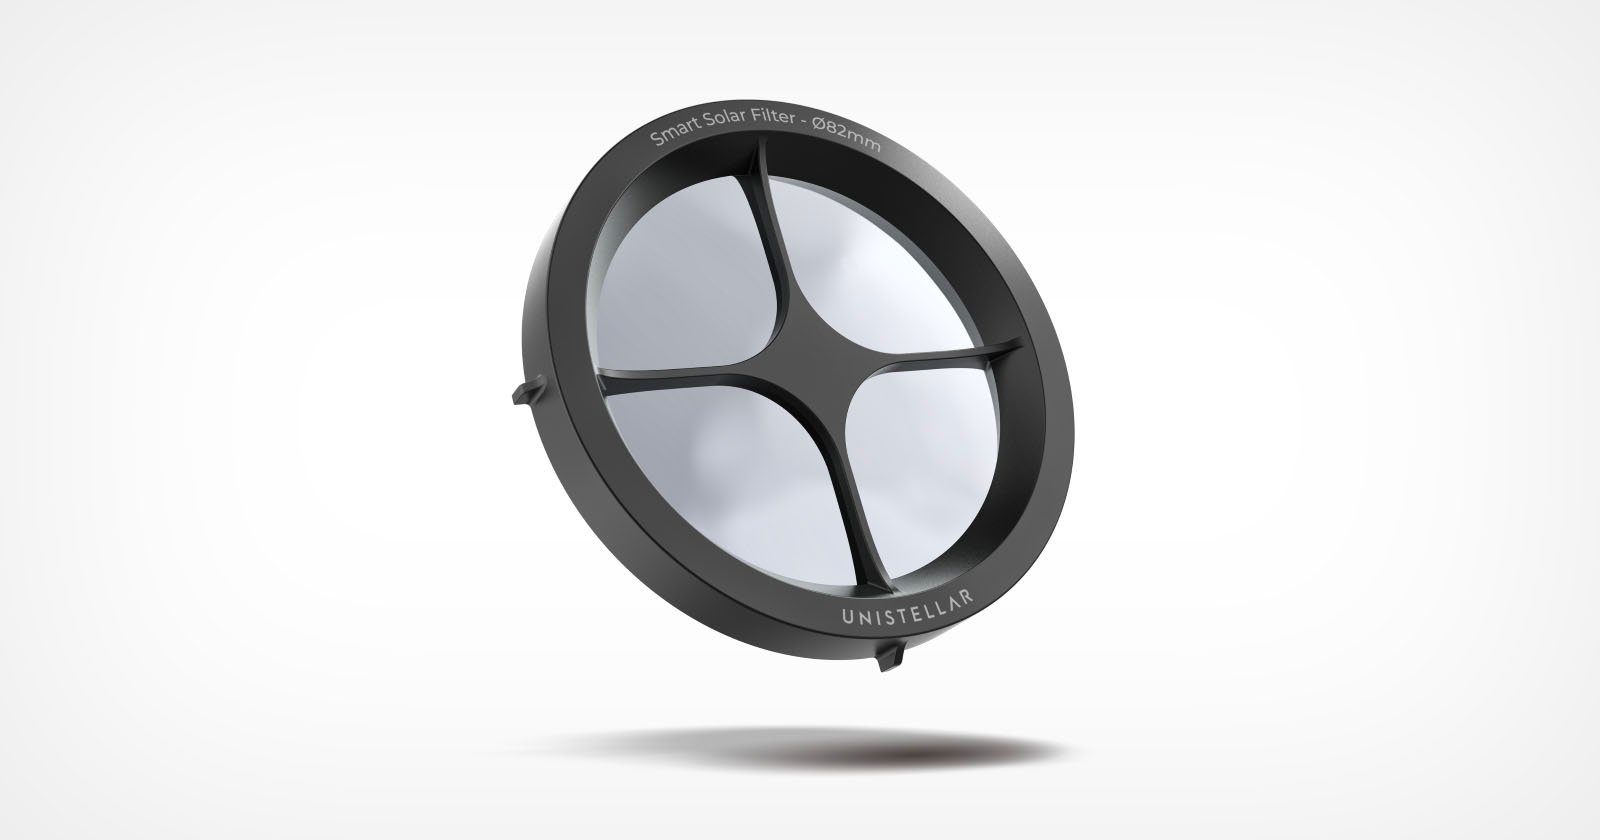 Unistellar Brings Its Smart Solar Filter to the Odyssey Telescope Line